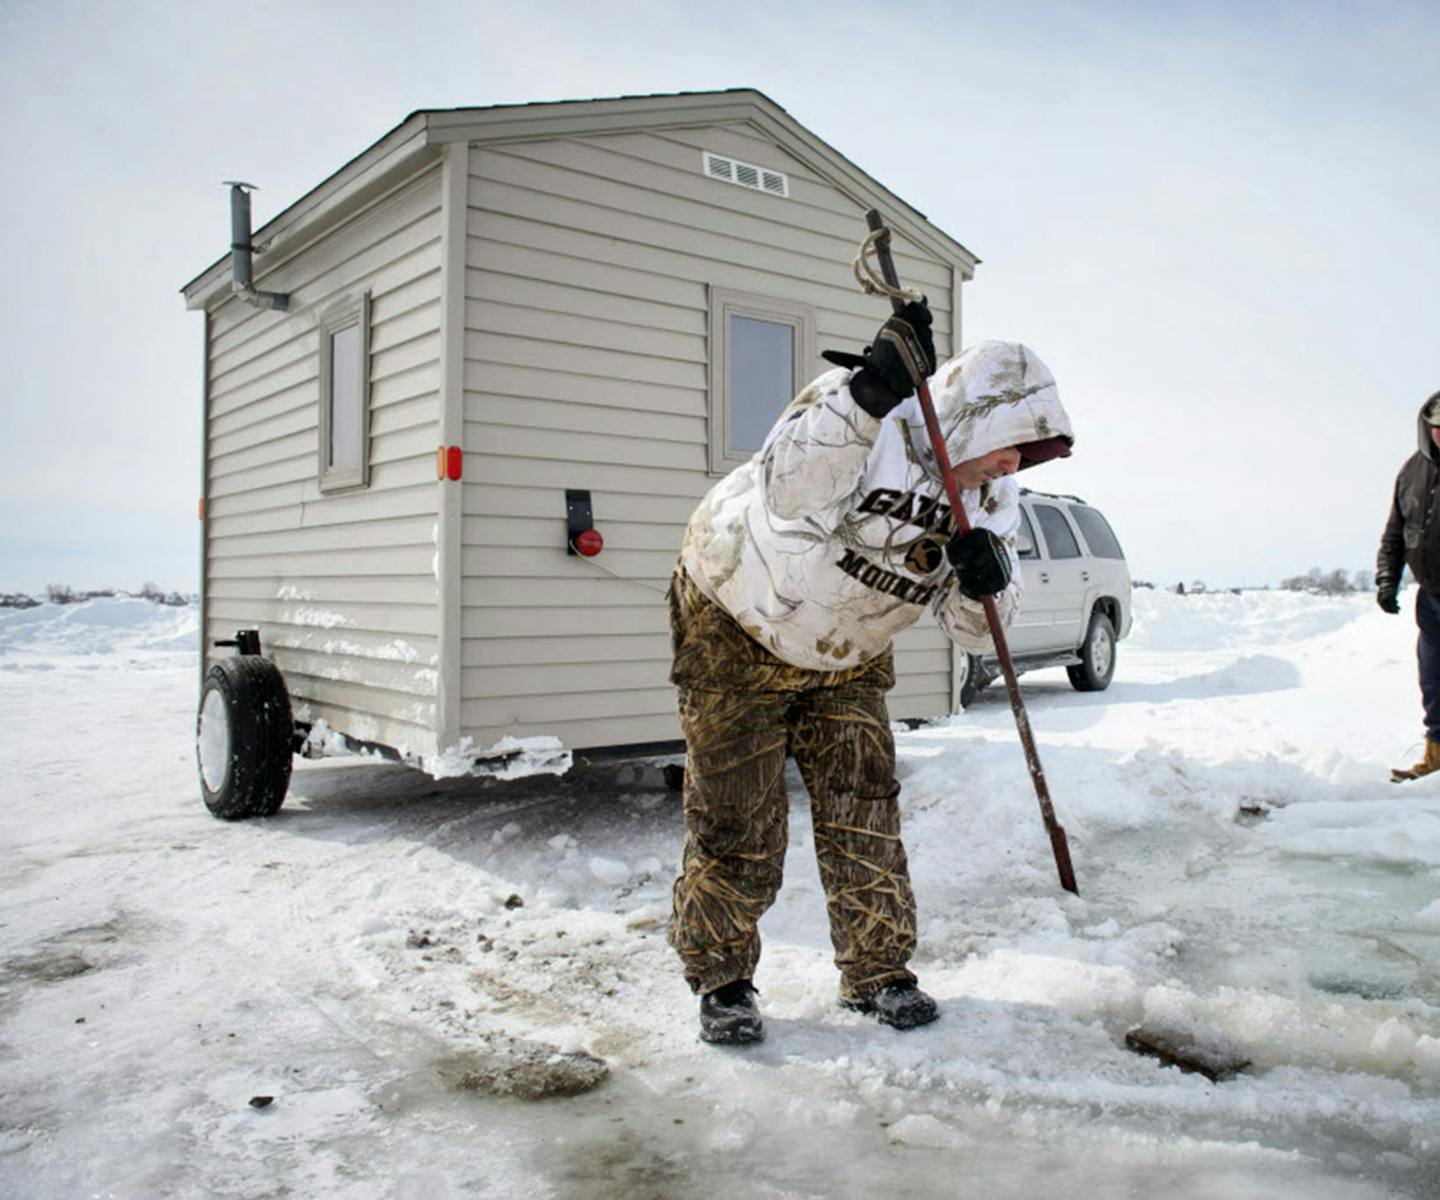 Boom in 'wheel house' sales means more people ice fishing